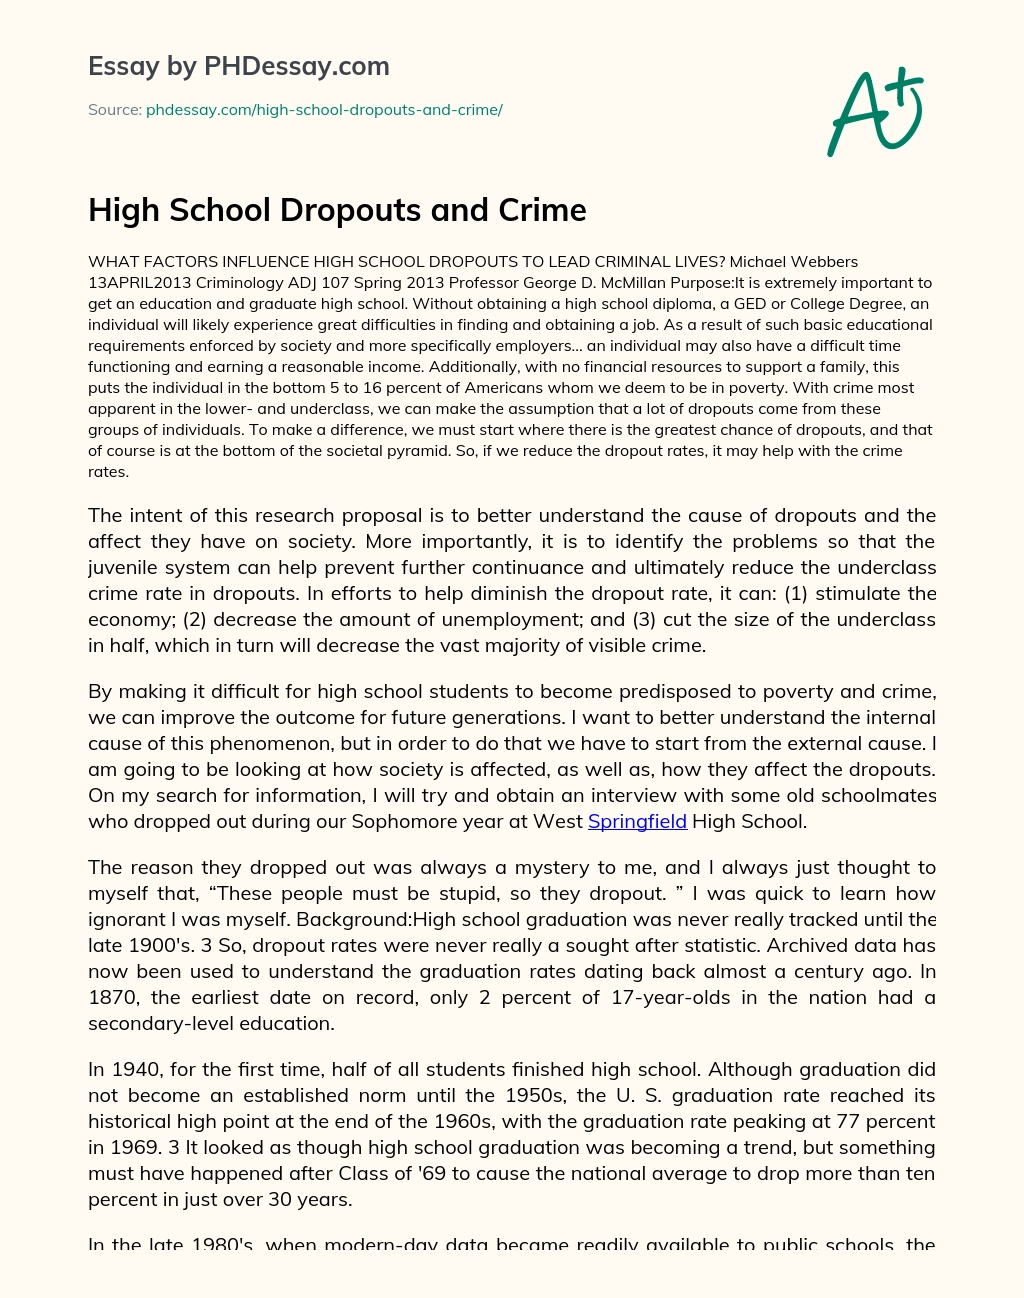 High School Dropouts and Crime essay